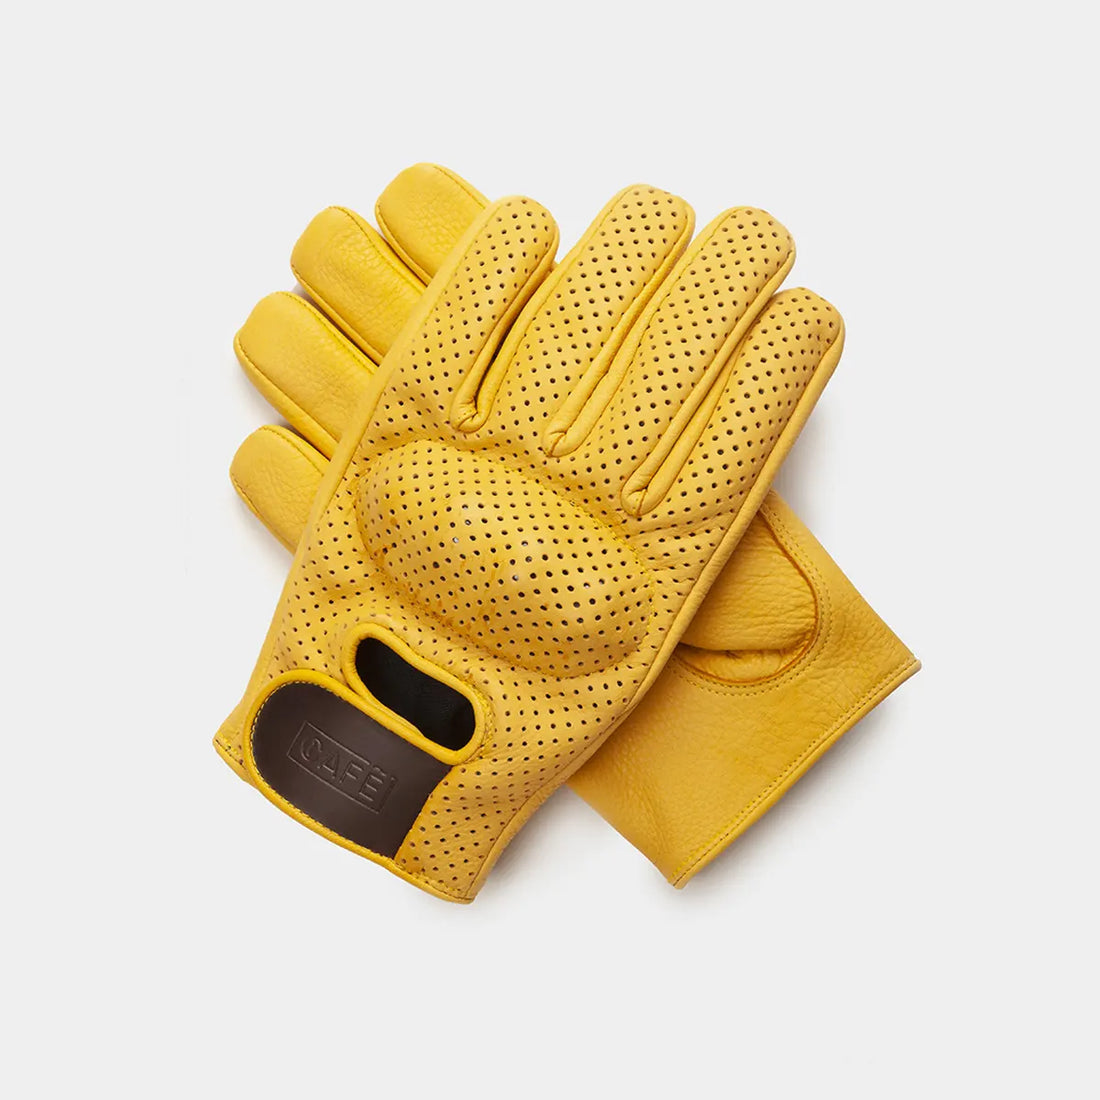 The Dirt Gloves Carbon/Kevlar in Cream